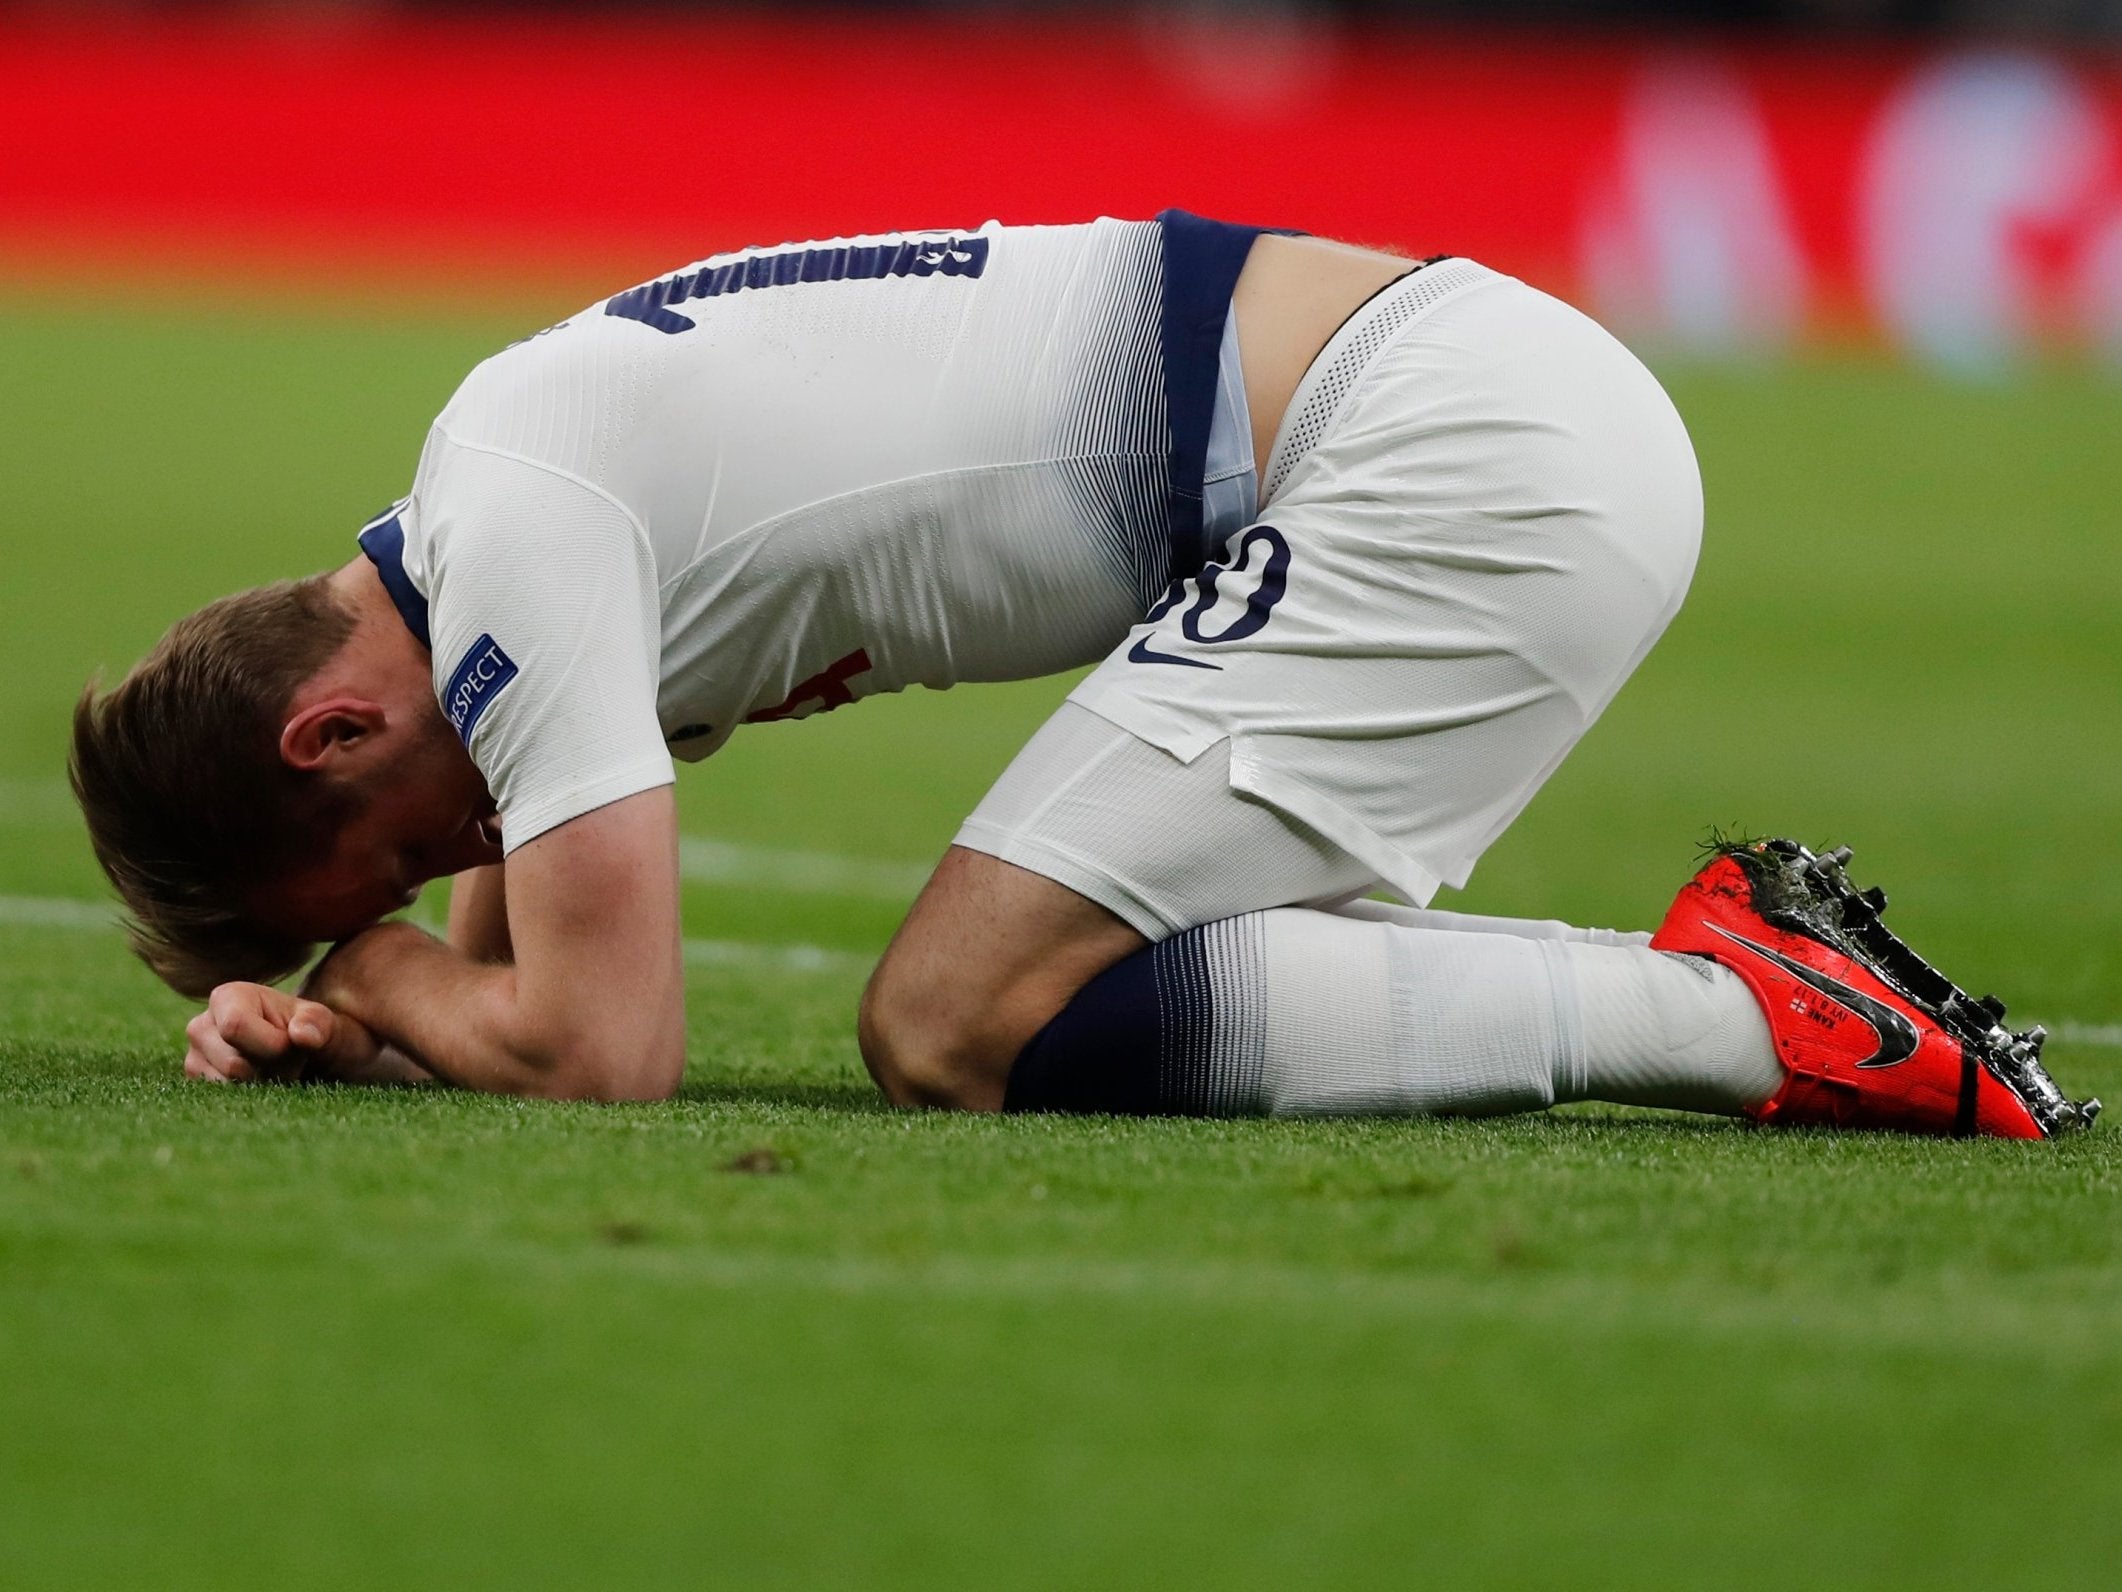 Harry Kane injury: Tottenham talisman limps off after challenge with Manchester City ...2122 x 1592